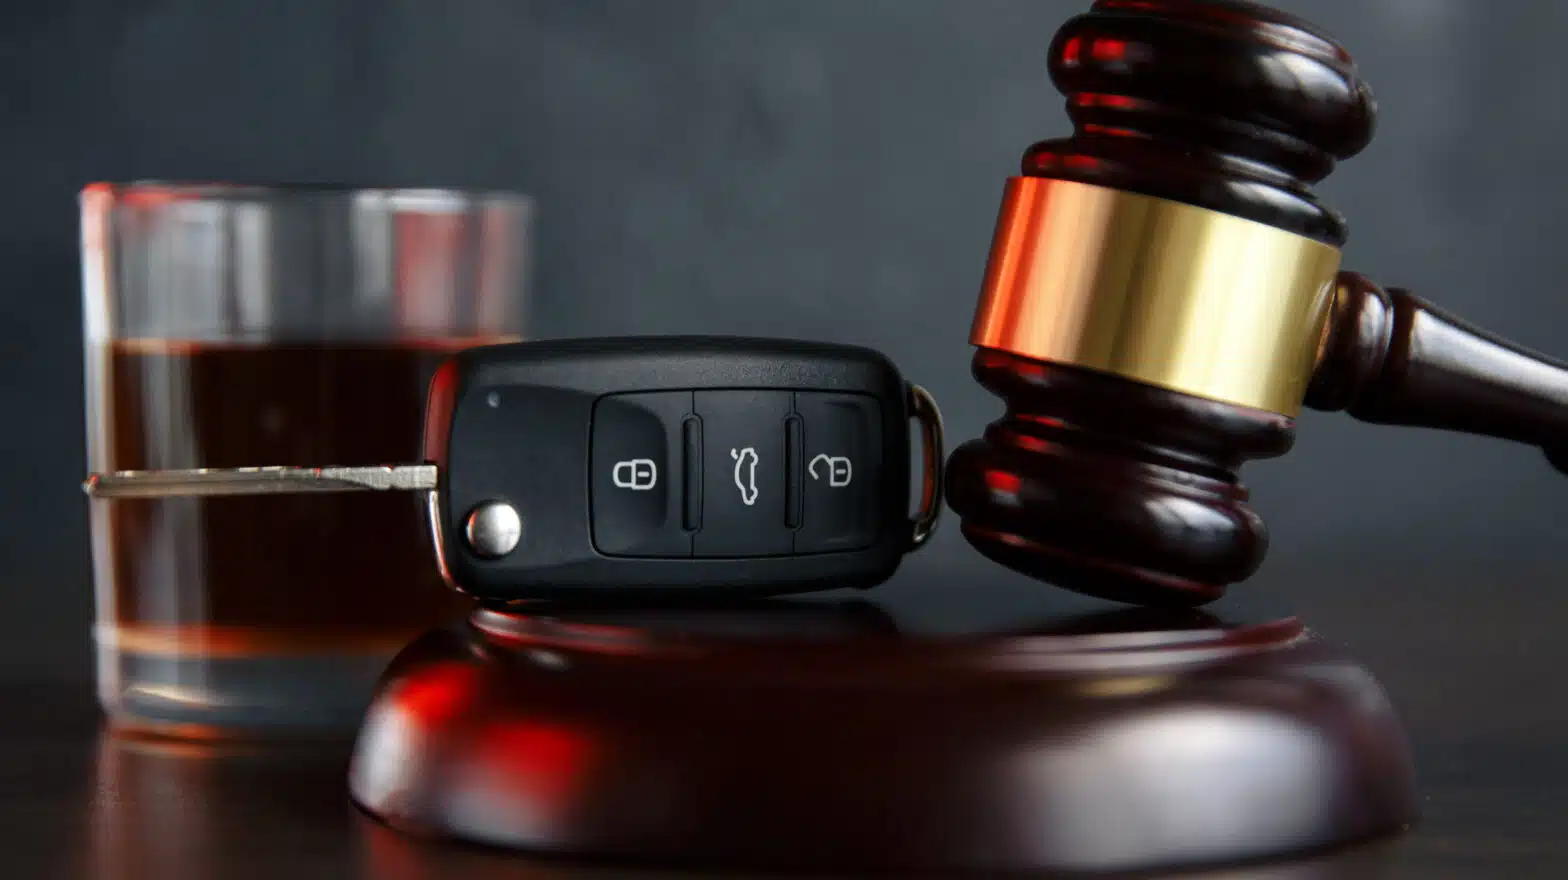 A car key sits between a glass of liquor and a gavel - Will Going To Treatment Reduce Charges For A DUIDWI